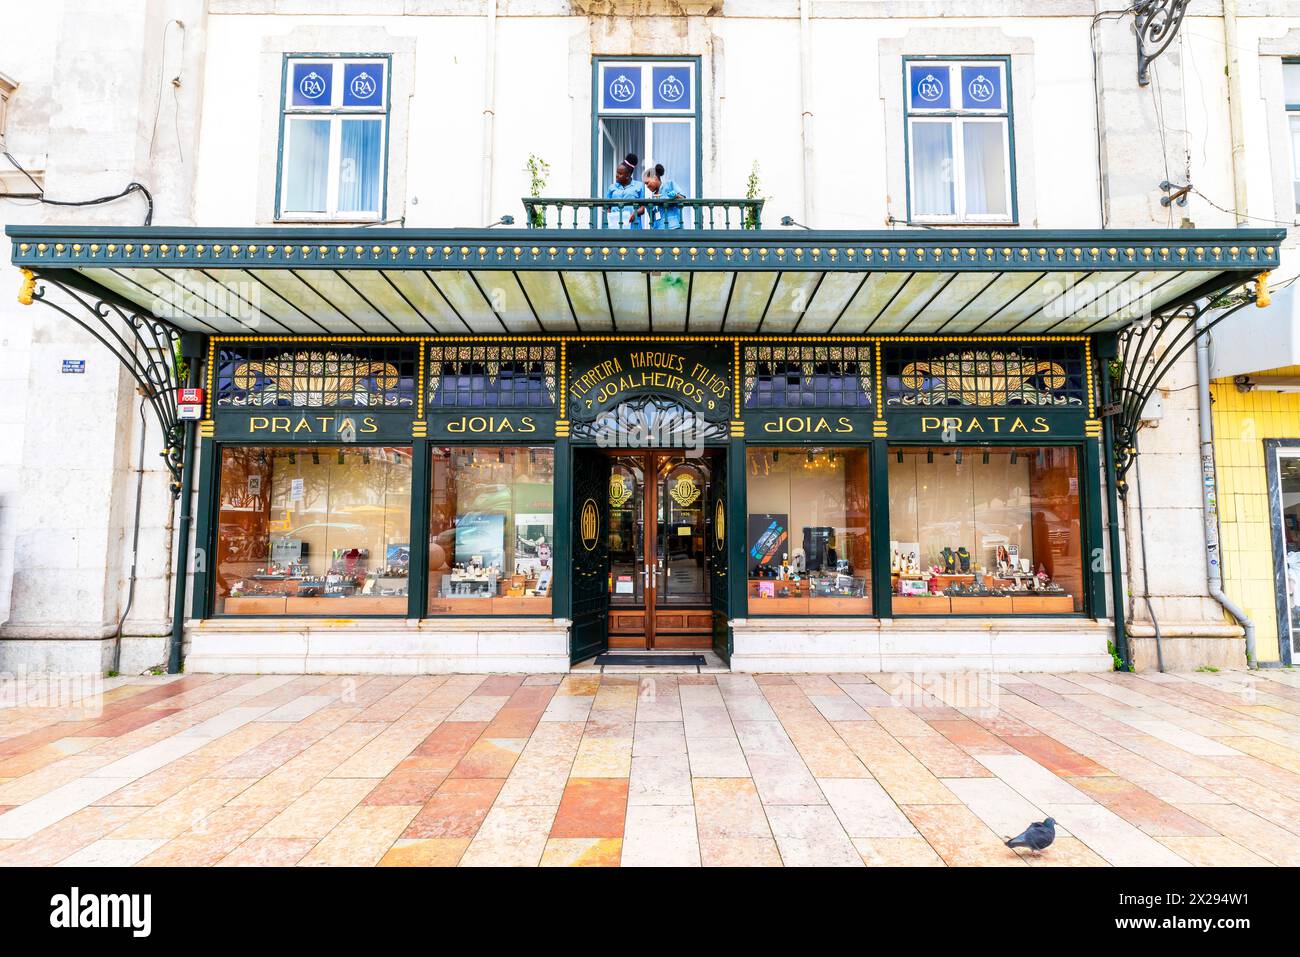 Joalharia Ferreira Marques  jewelry shop was founded in 1926 by Adriano Ferreira Marques. The store has one of the most beautiful facades of Rossio. I Stock Photo